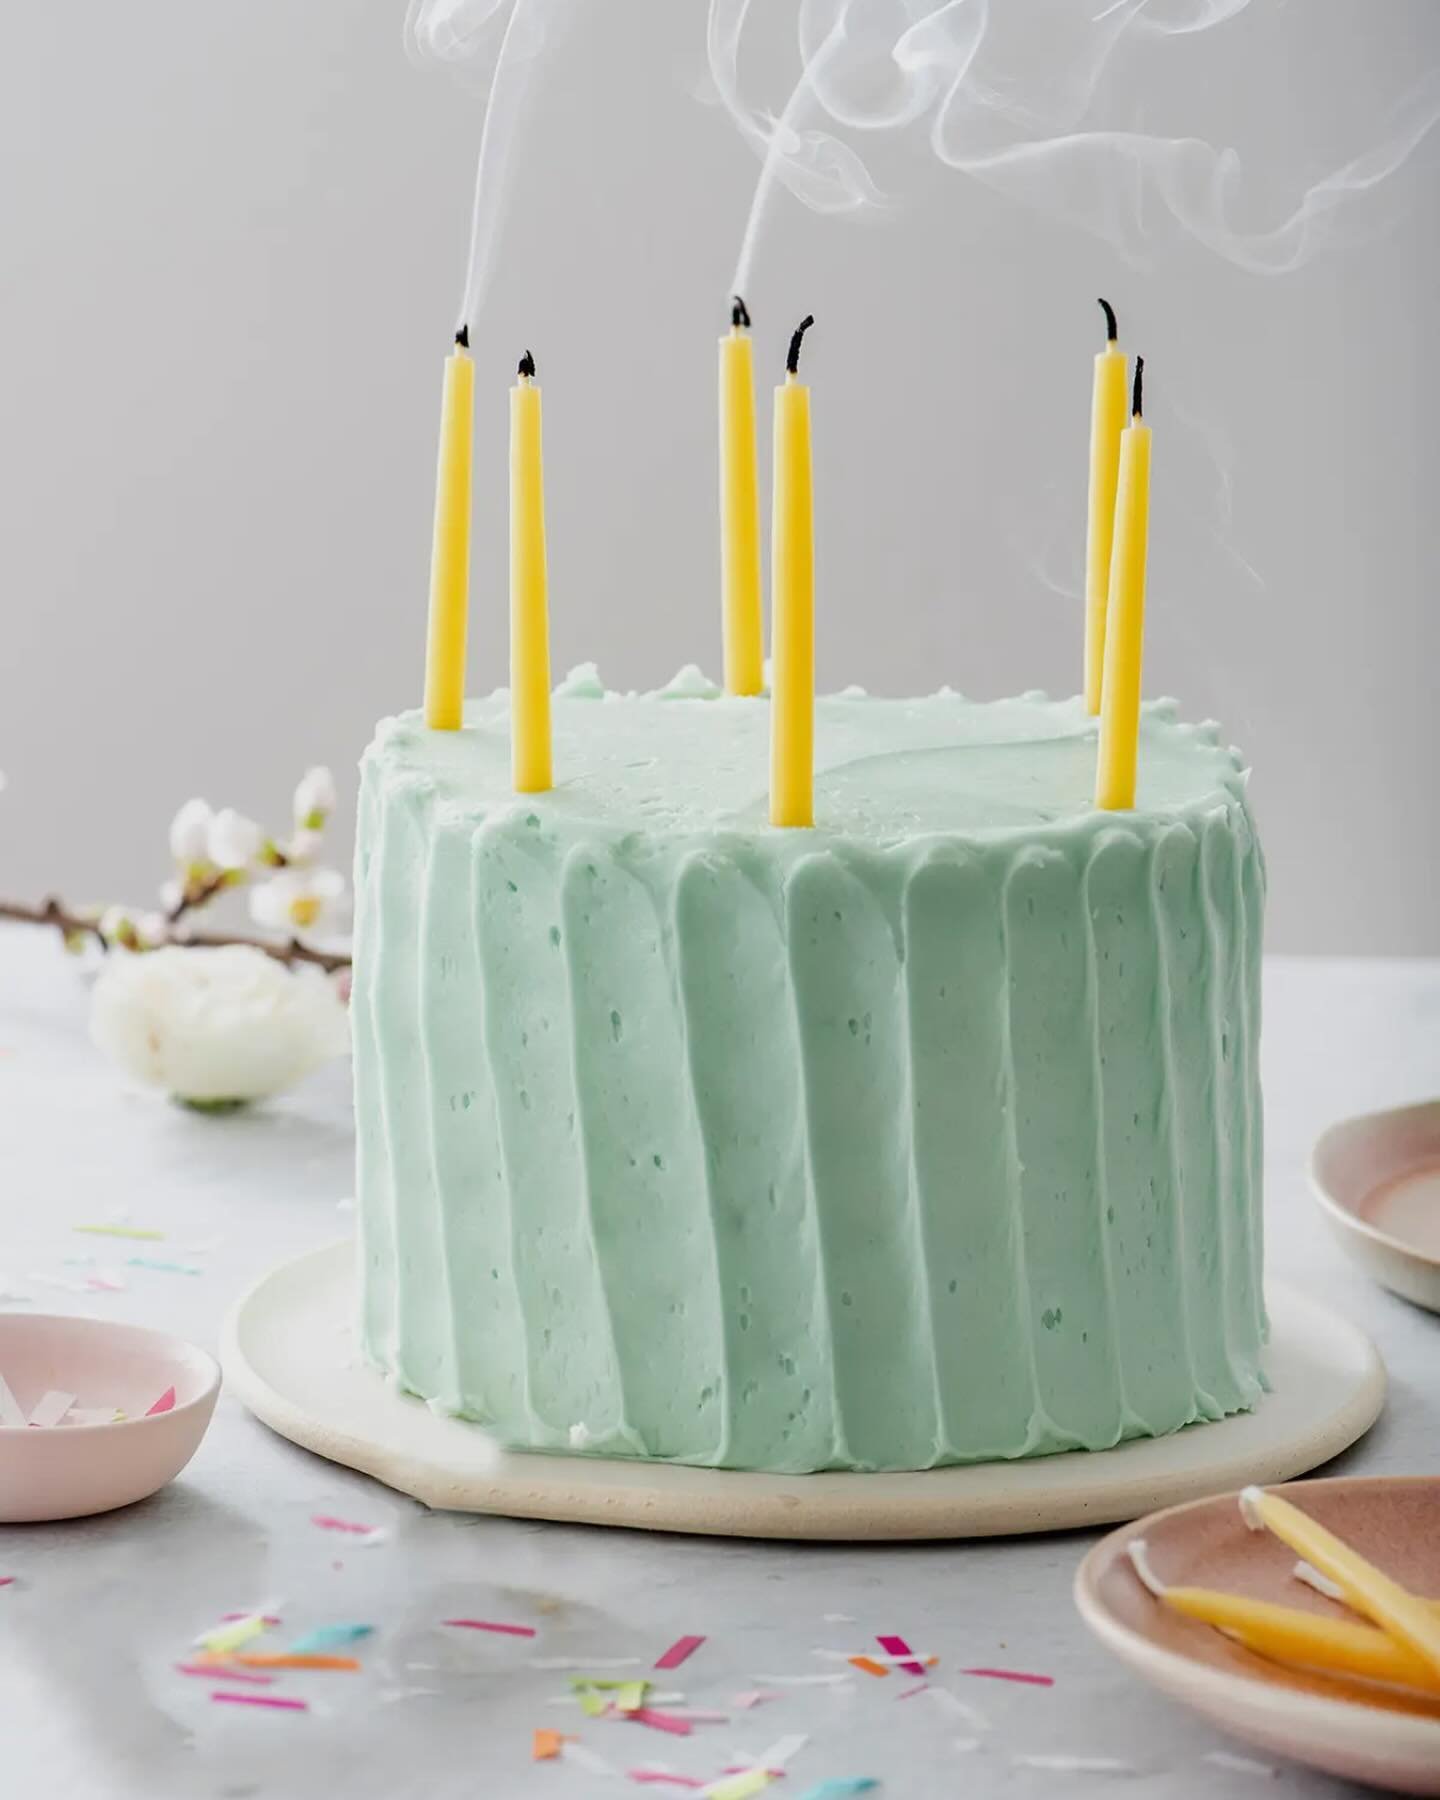 Happy Wednesday! We&rsquo;re over here thinking about how cool these beeswax birthday candles are. Adorable and reusable? We&rsquo;ll take 10! 🎂

These 4&rdquo; beeswax candles can be reused for many birthdays to come. Plus, they look so cute! Snag 